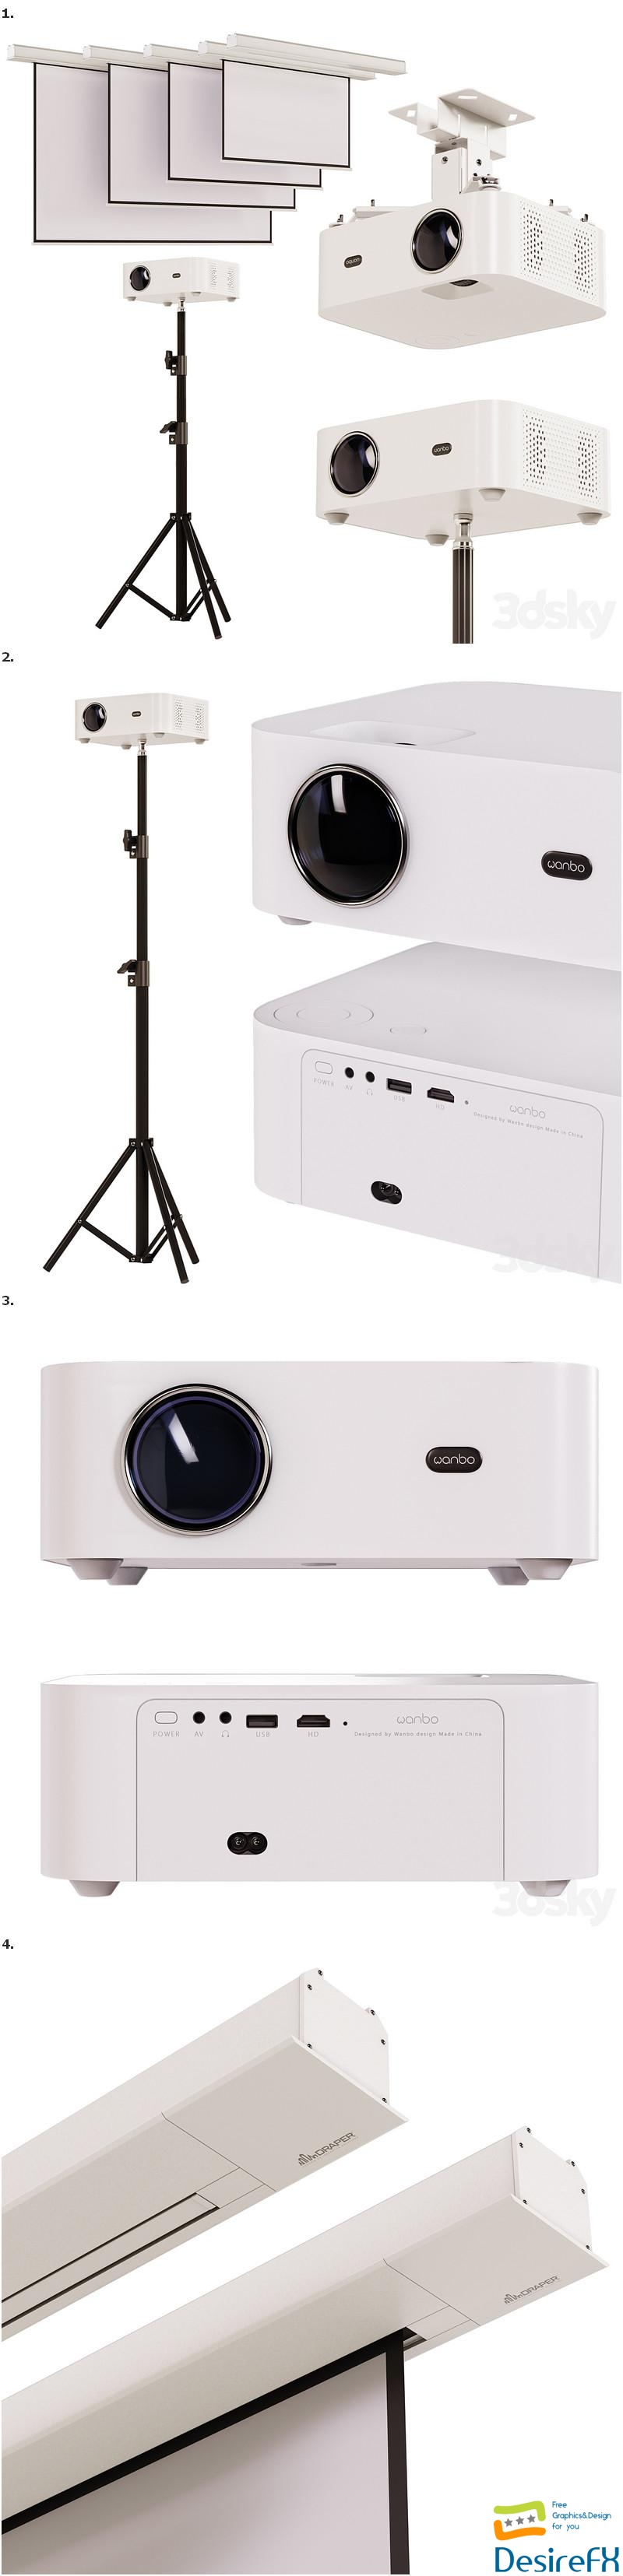 Xiaomi wanbo projector and projection screens 3D Model